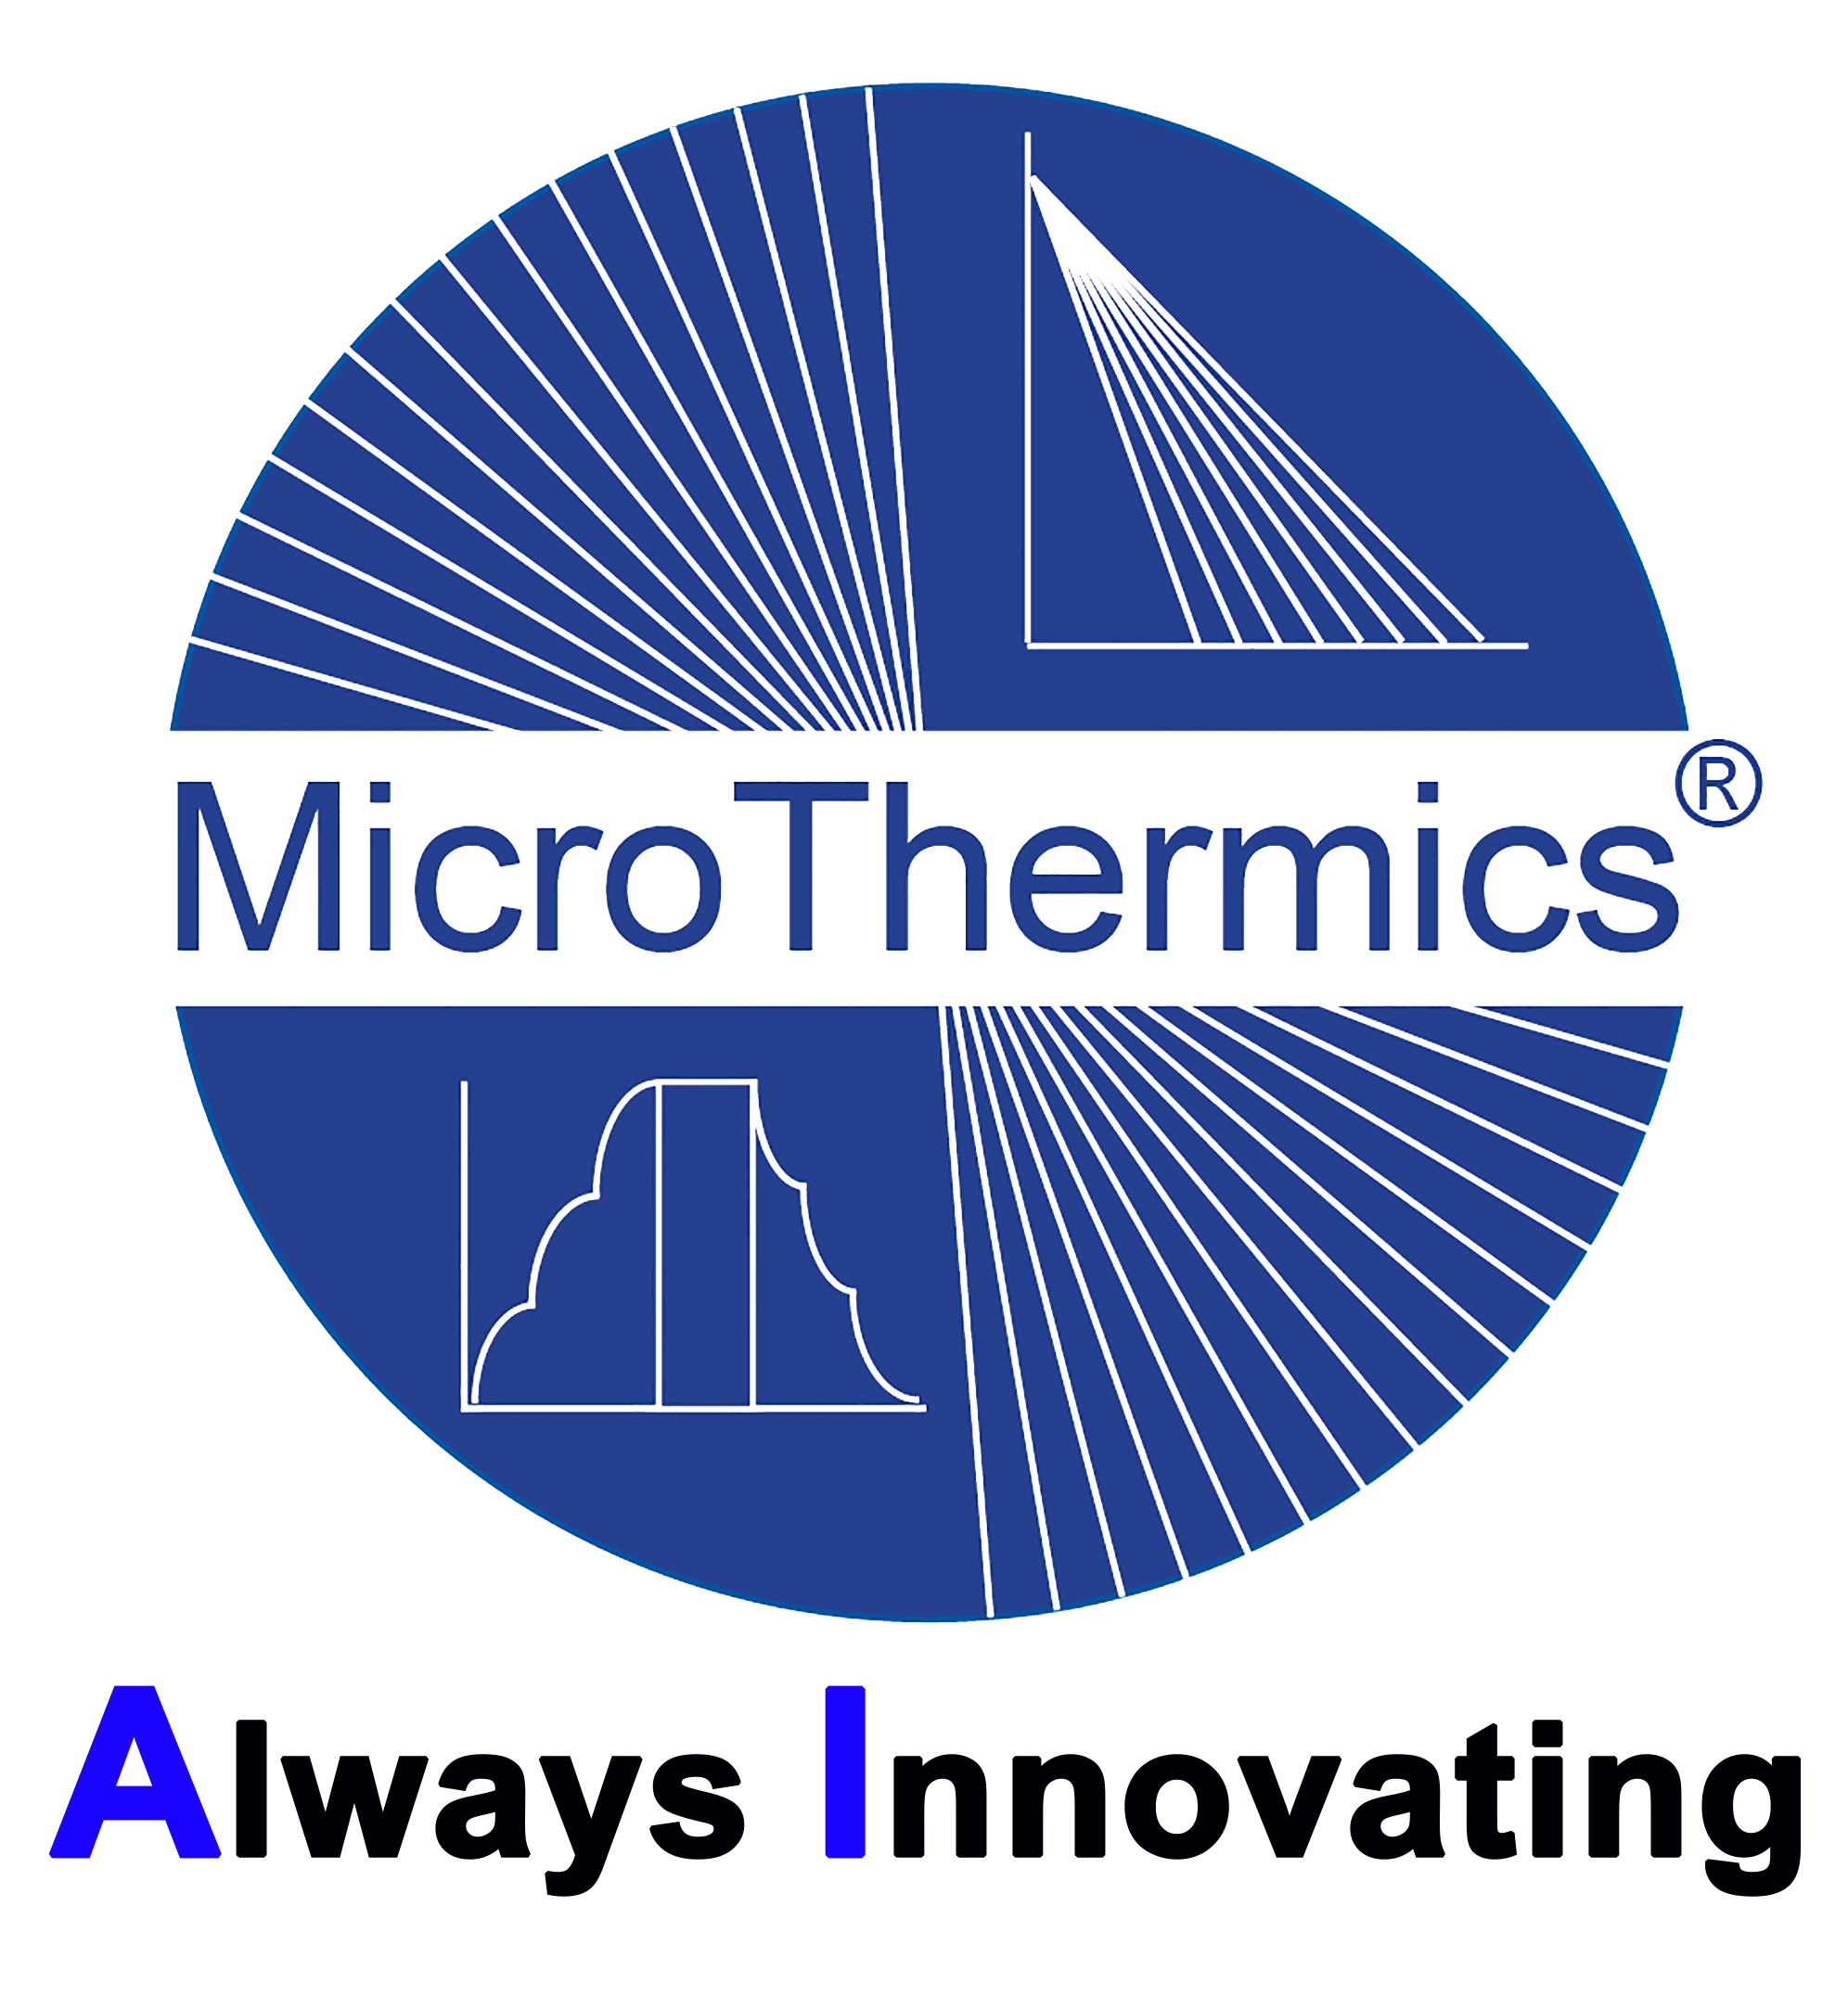 MicroThermics 2 Minute Introduction Video